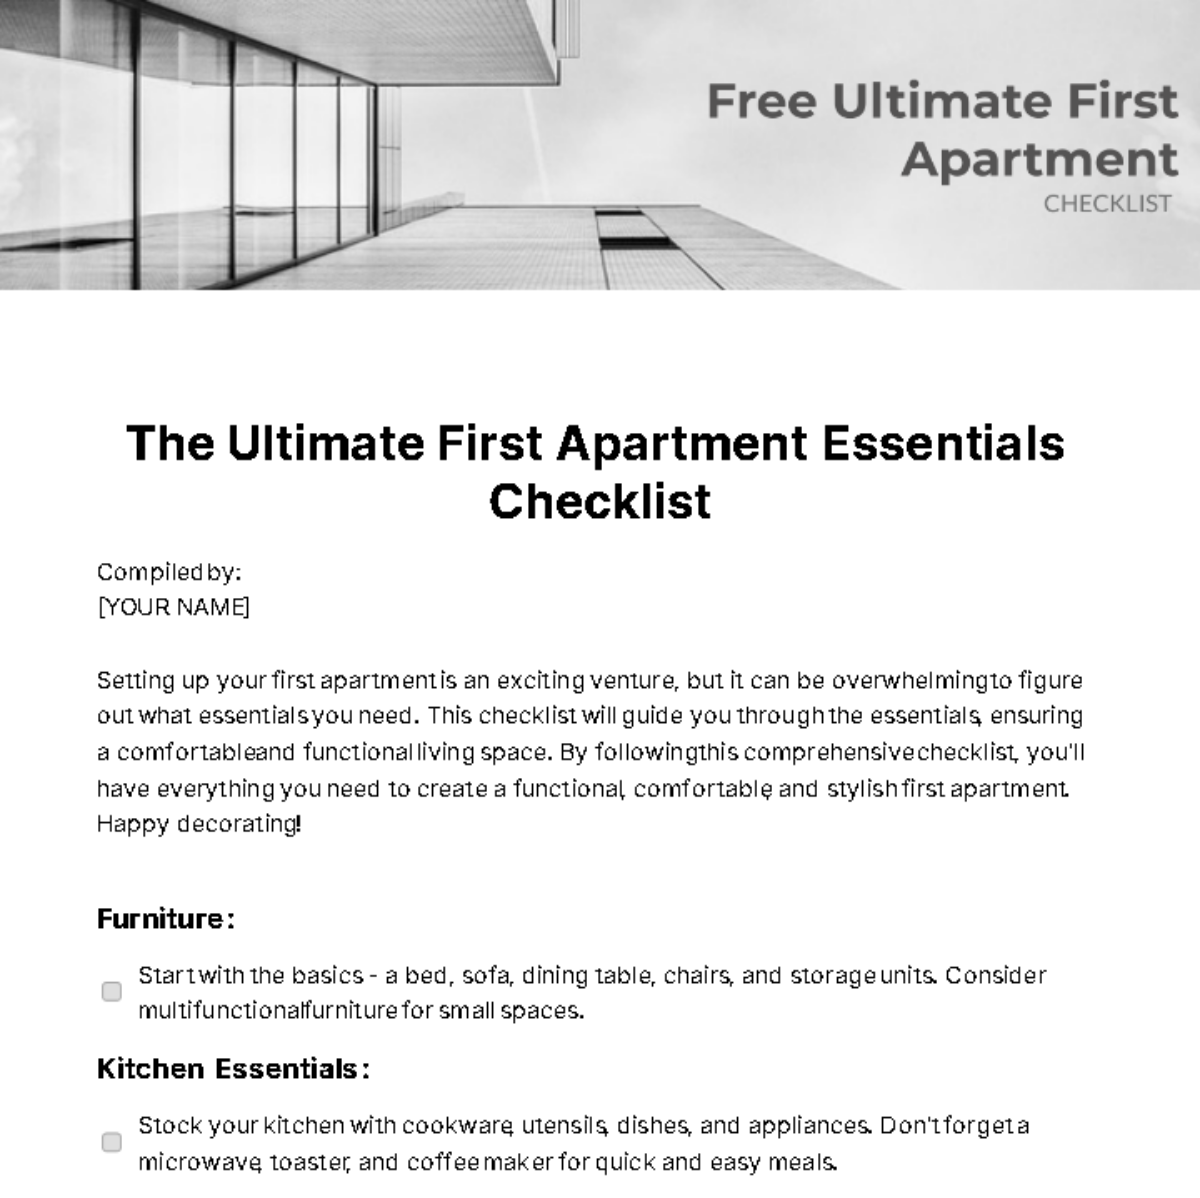 Free Ultimate First Apartment Checklist Template